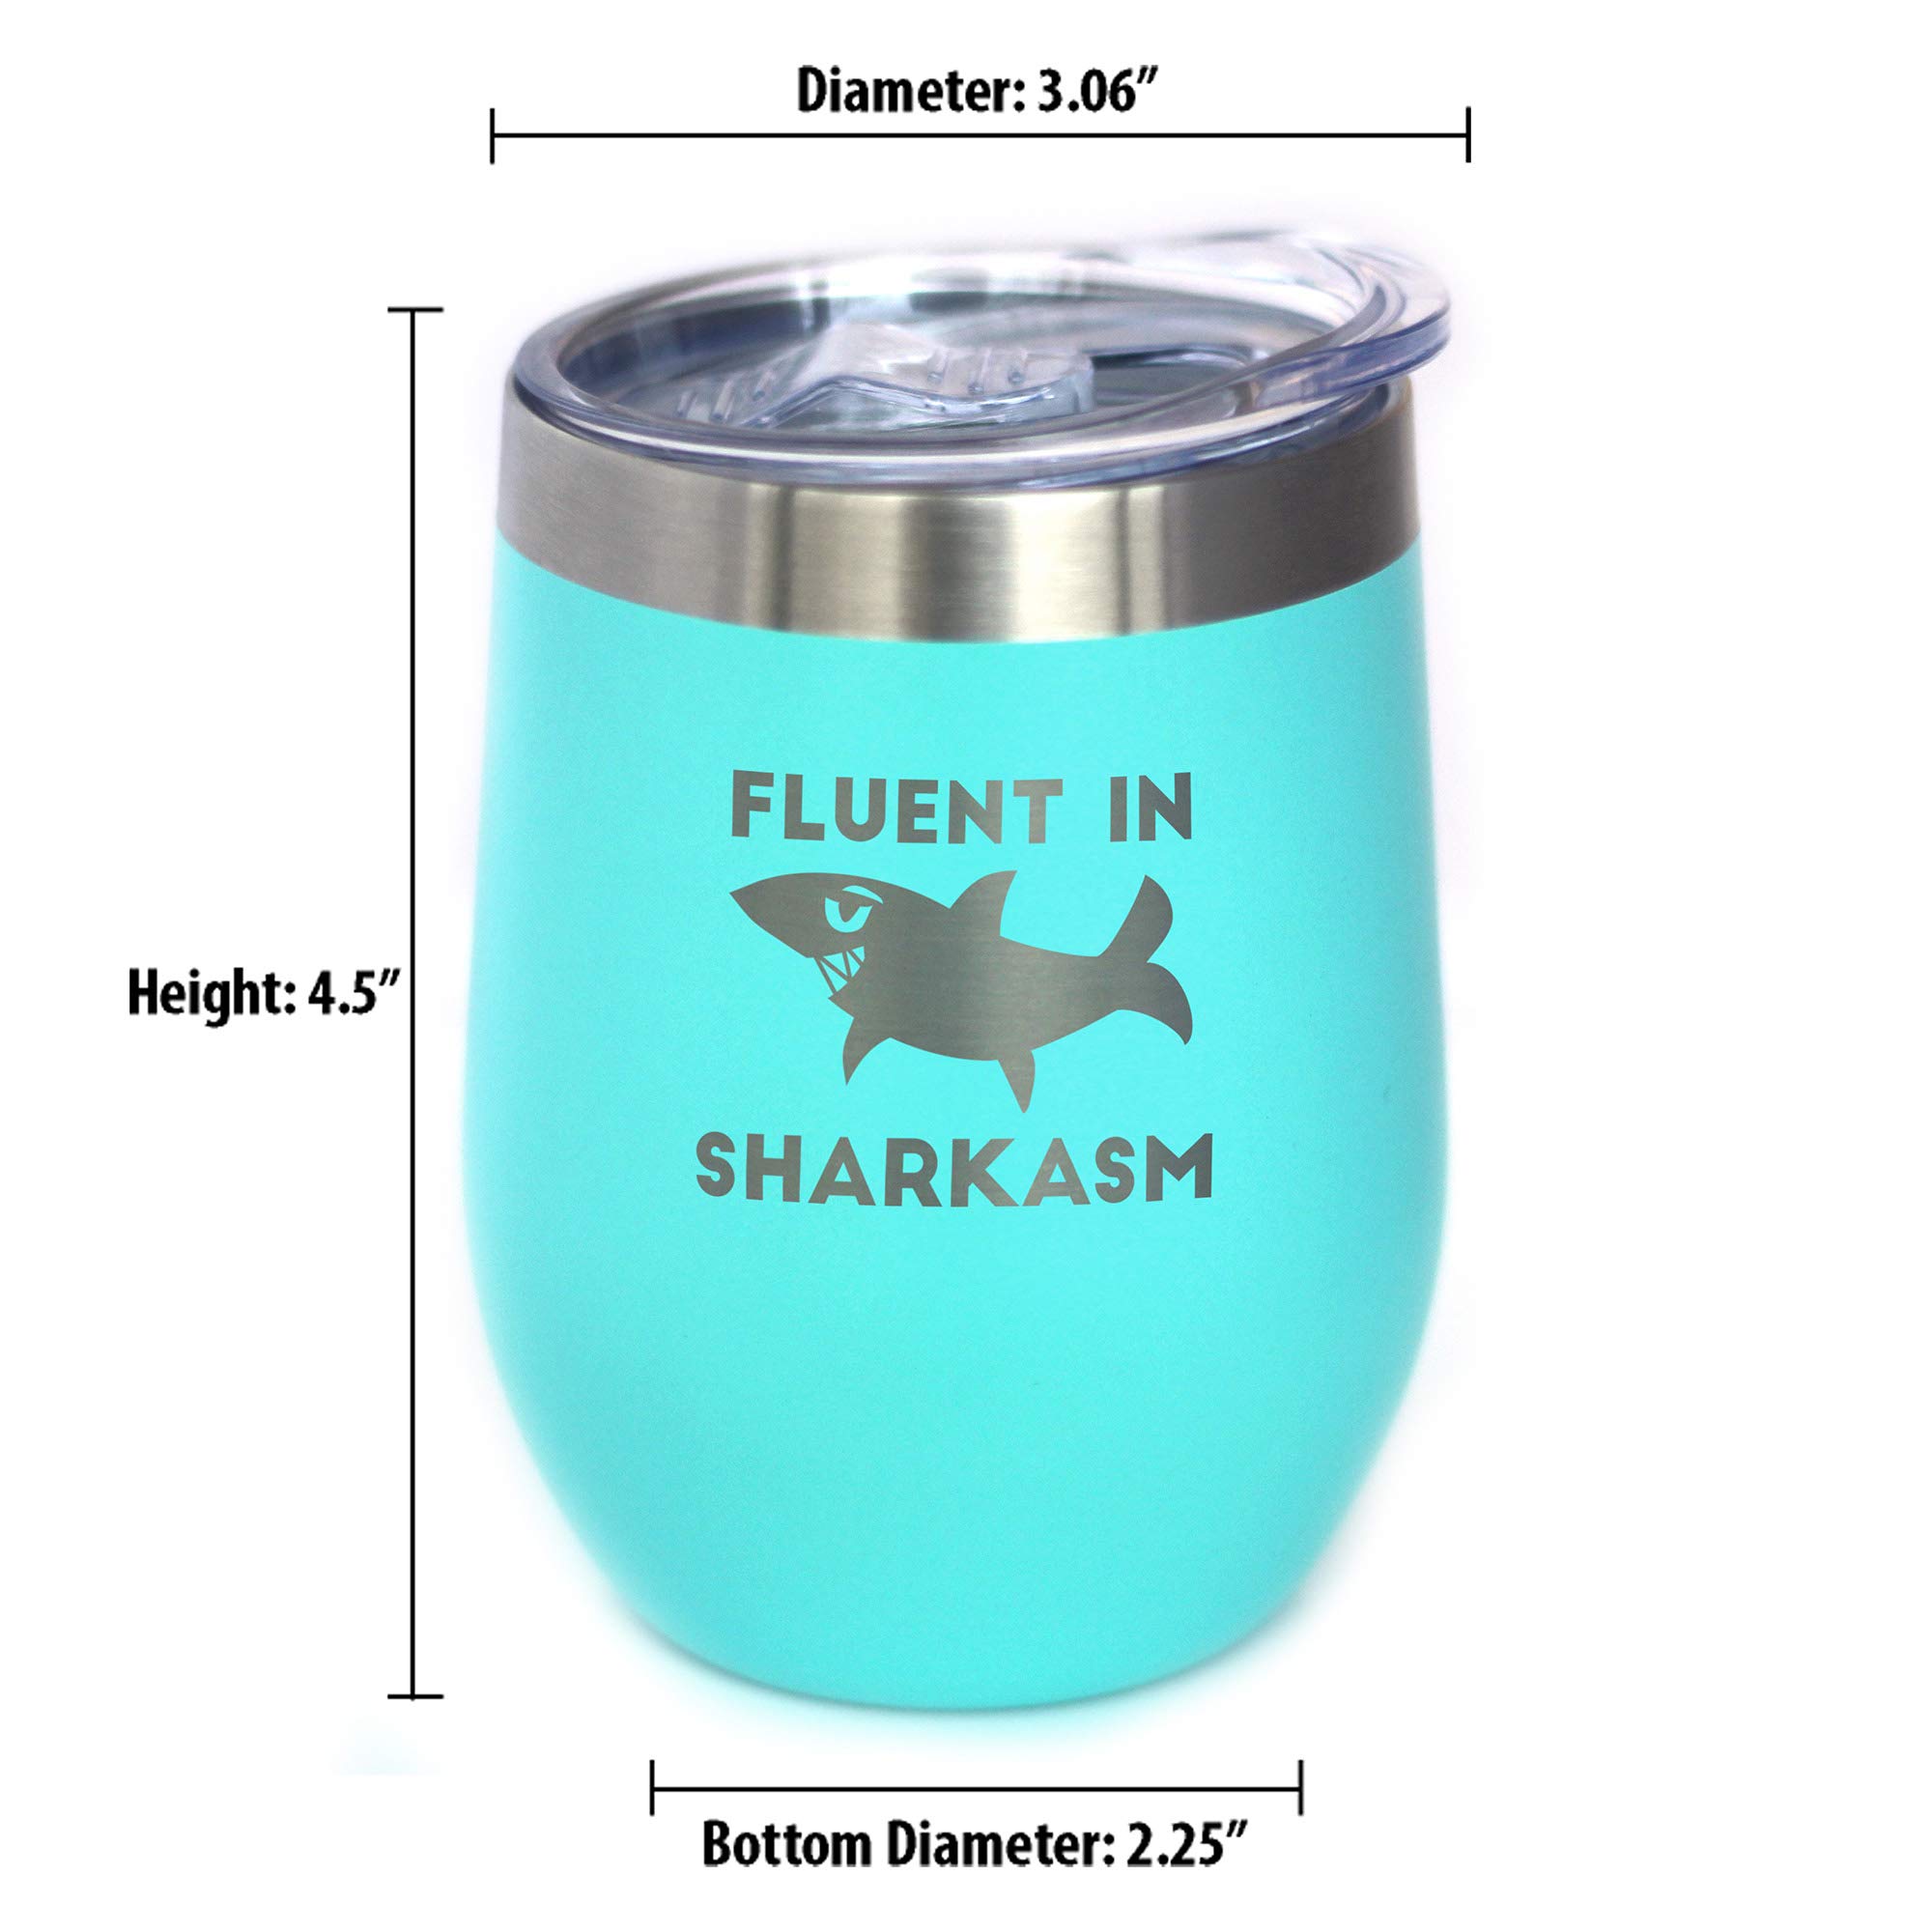 Bevvee Fluent in Sharkasm - Funny Shark Wine Tumbler Glass with Sliding Lid - Stainless Steel Insulated Mug - Cute Shark Decor Gifts - Teal